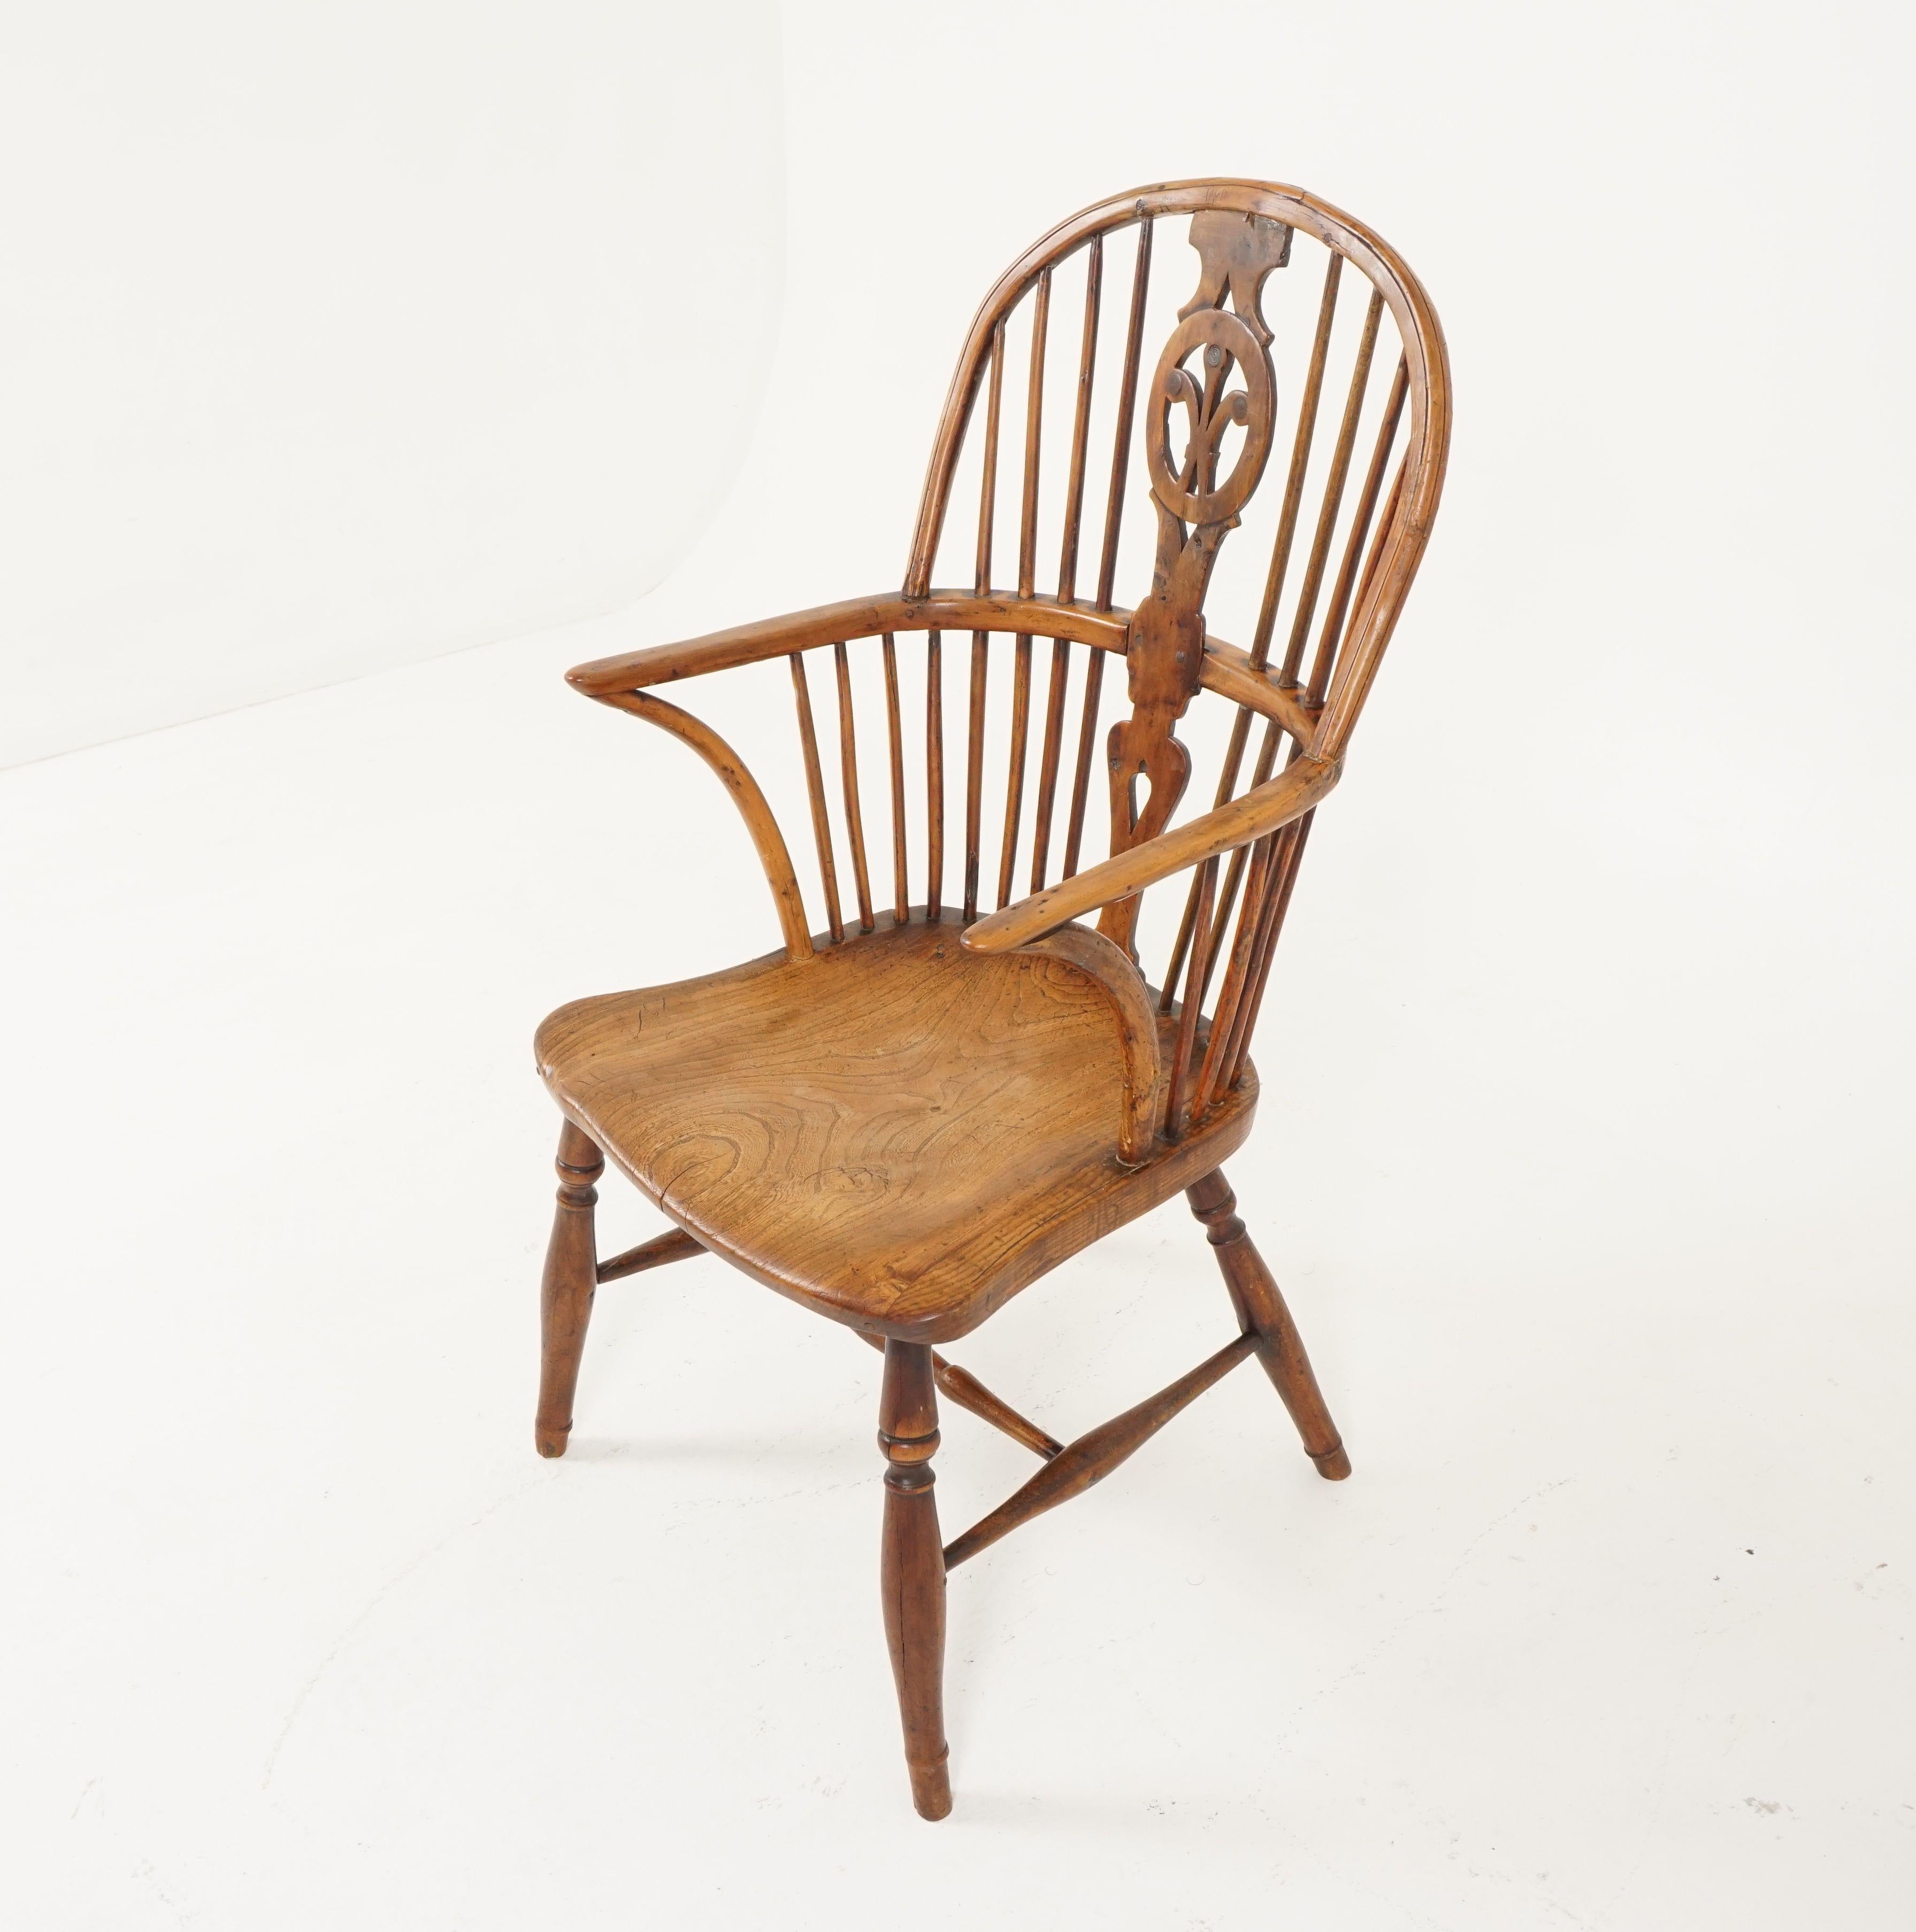 Antique armchair, Victorian Elm chair, bow back Windsor armchair, Scotland, 1820

Scotland, 1820
Solid yew and elm
Original finish
The chair has arching hoops with scribed edge line
The splat back is set into a bent arm with crook arm